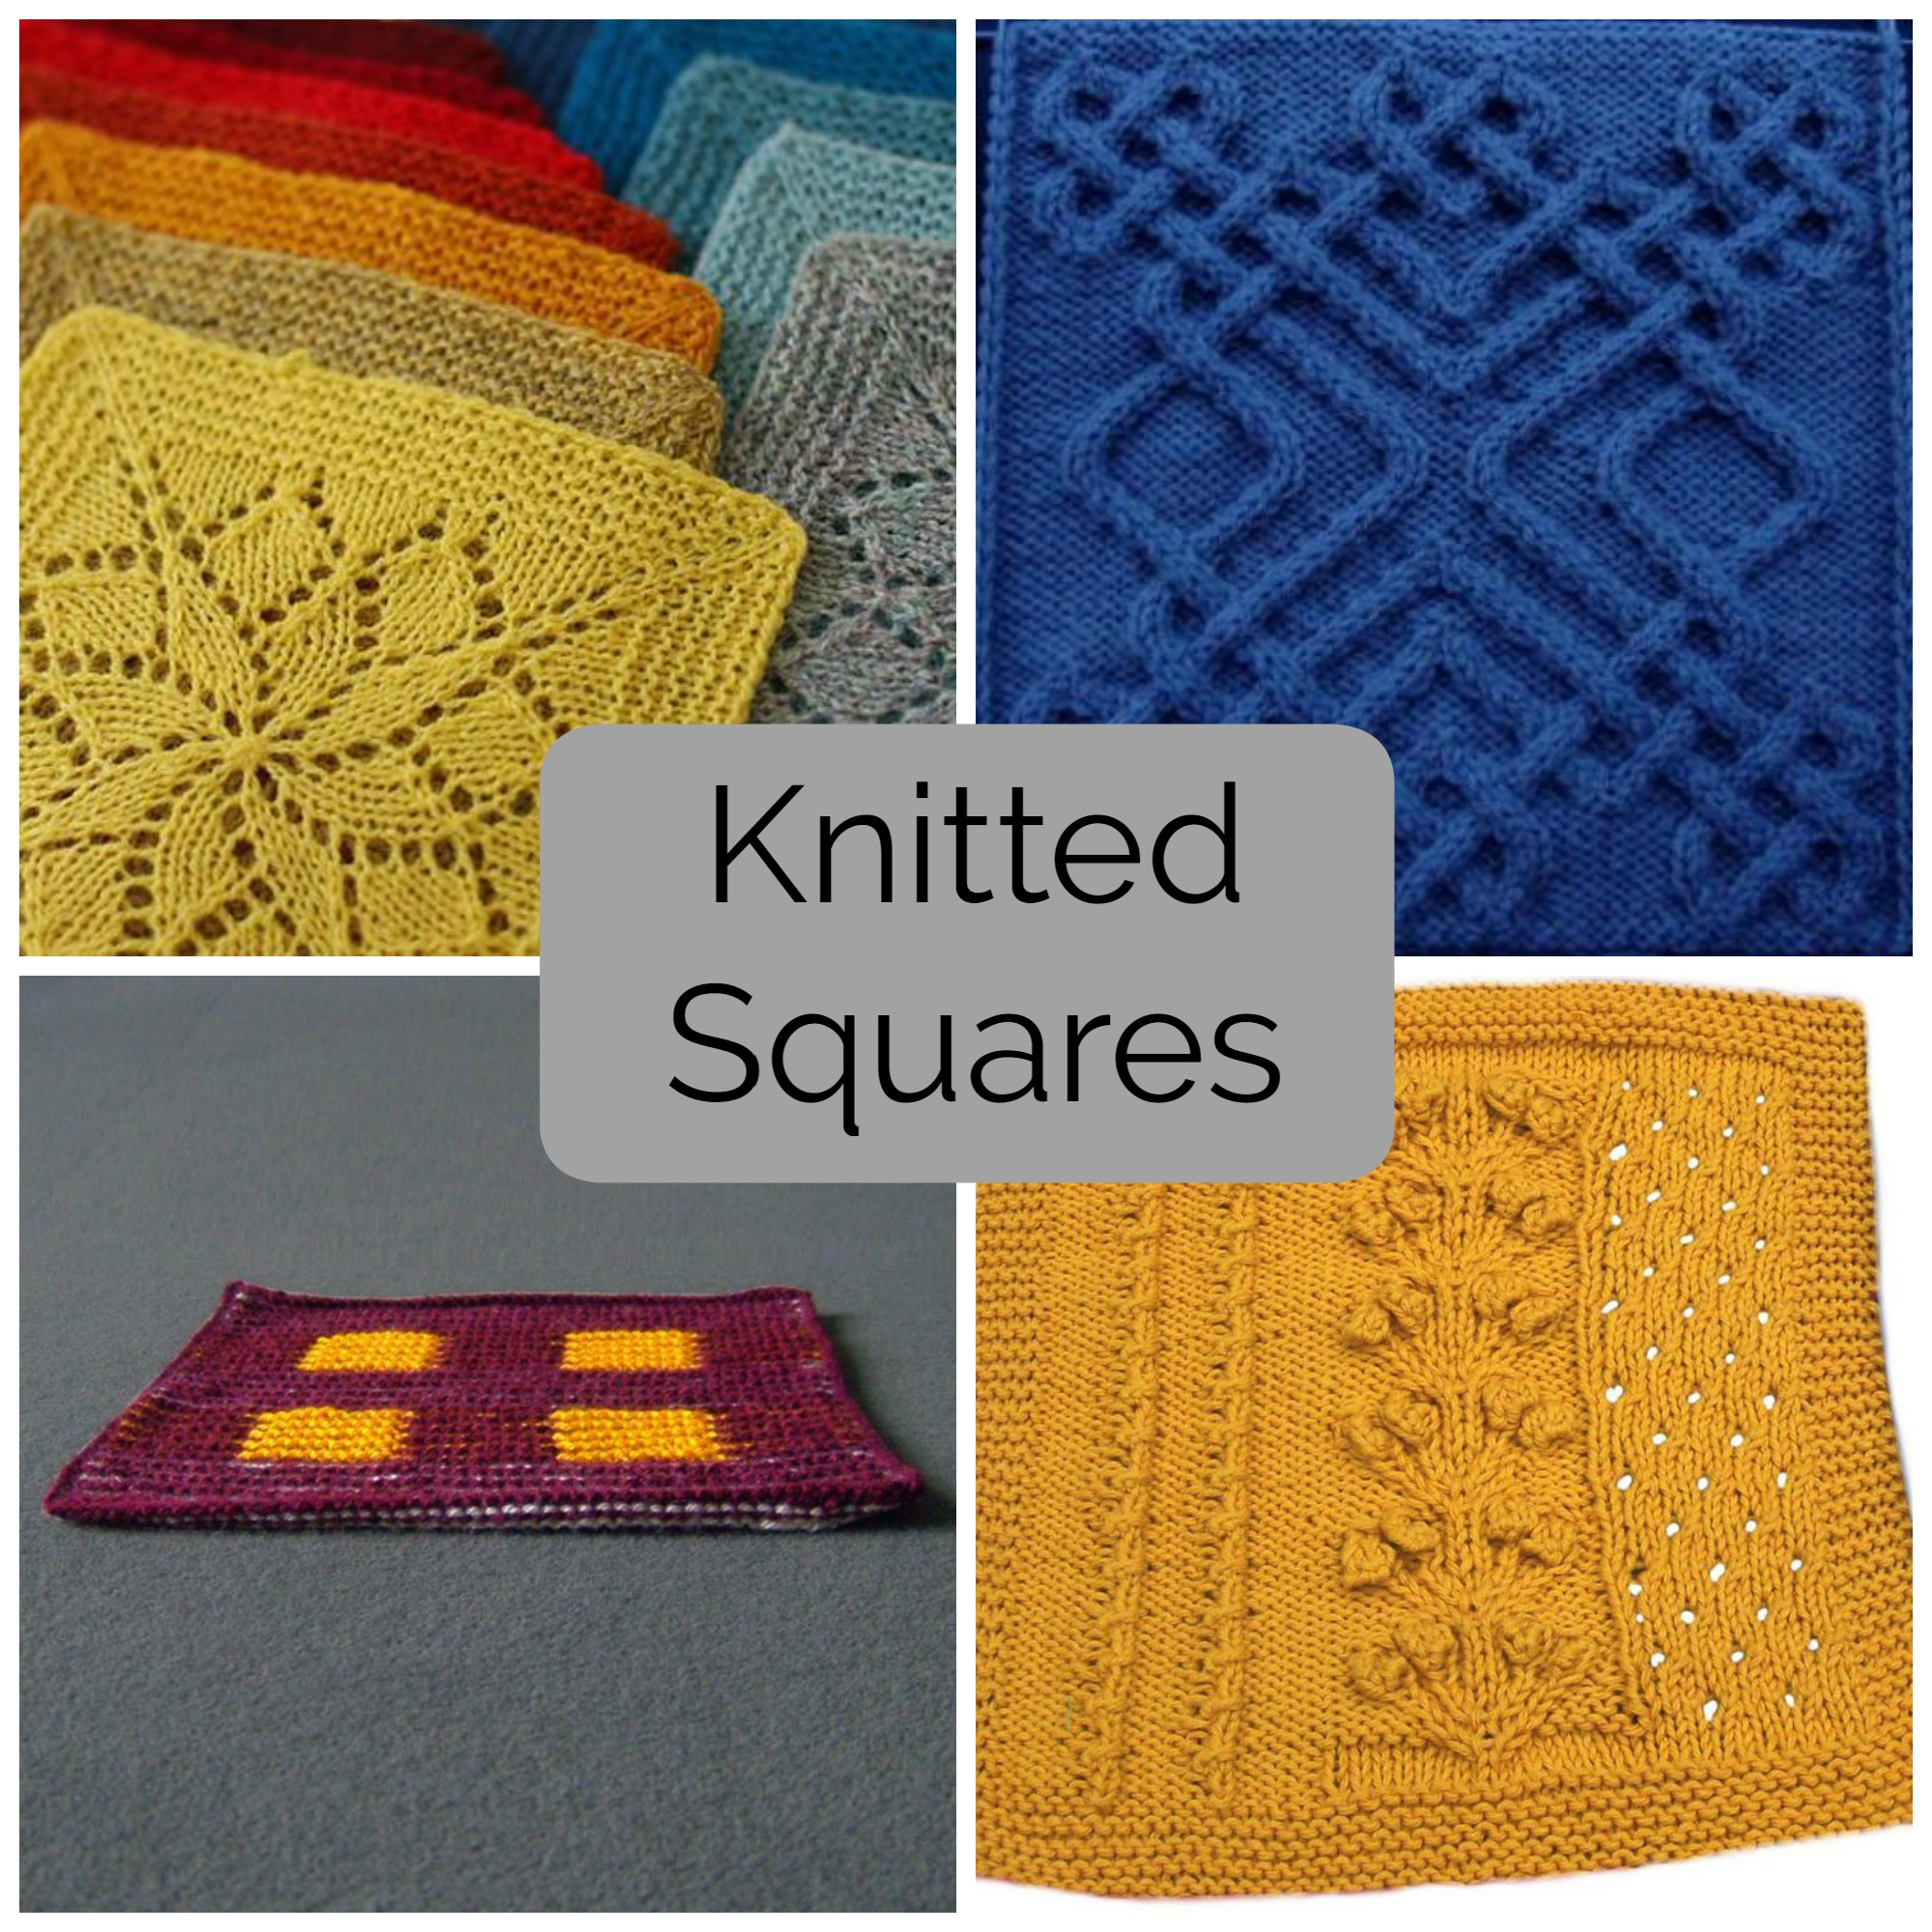 Celtic Afghan Knit Pattern Mix And Match These Knitted Squares For Any Project